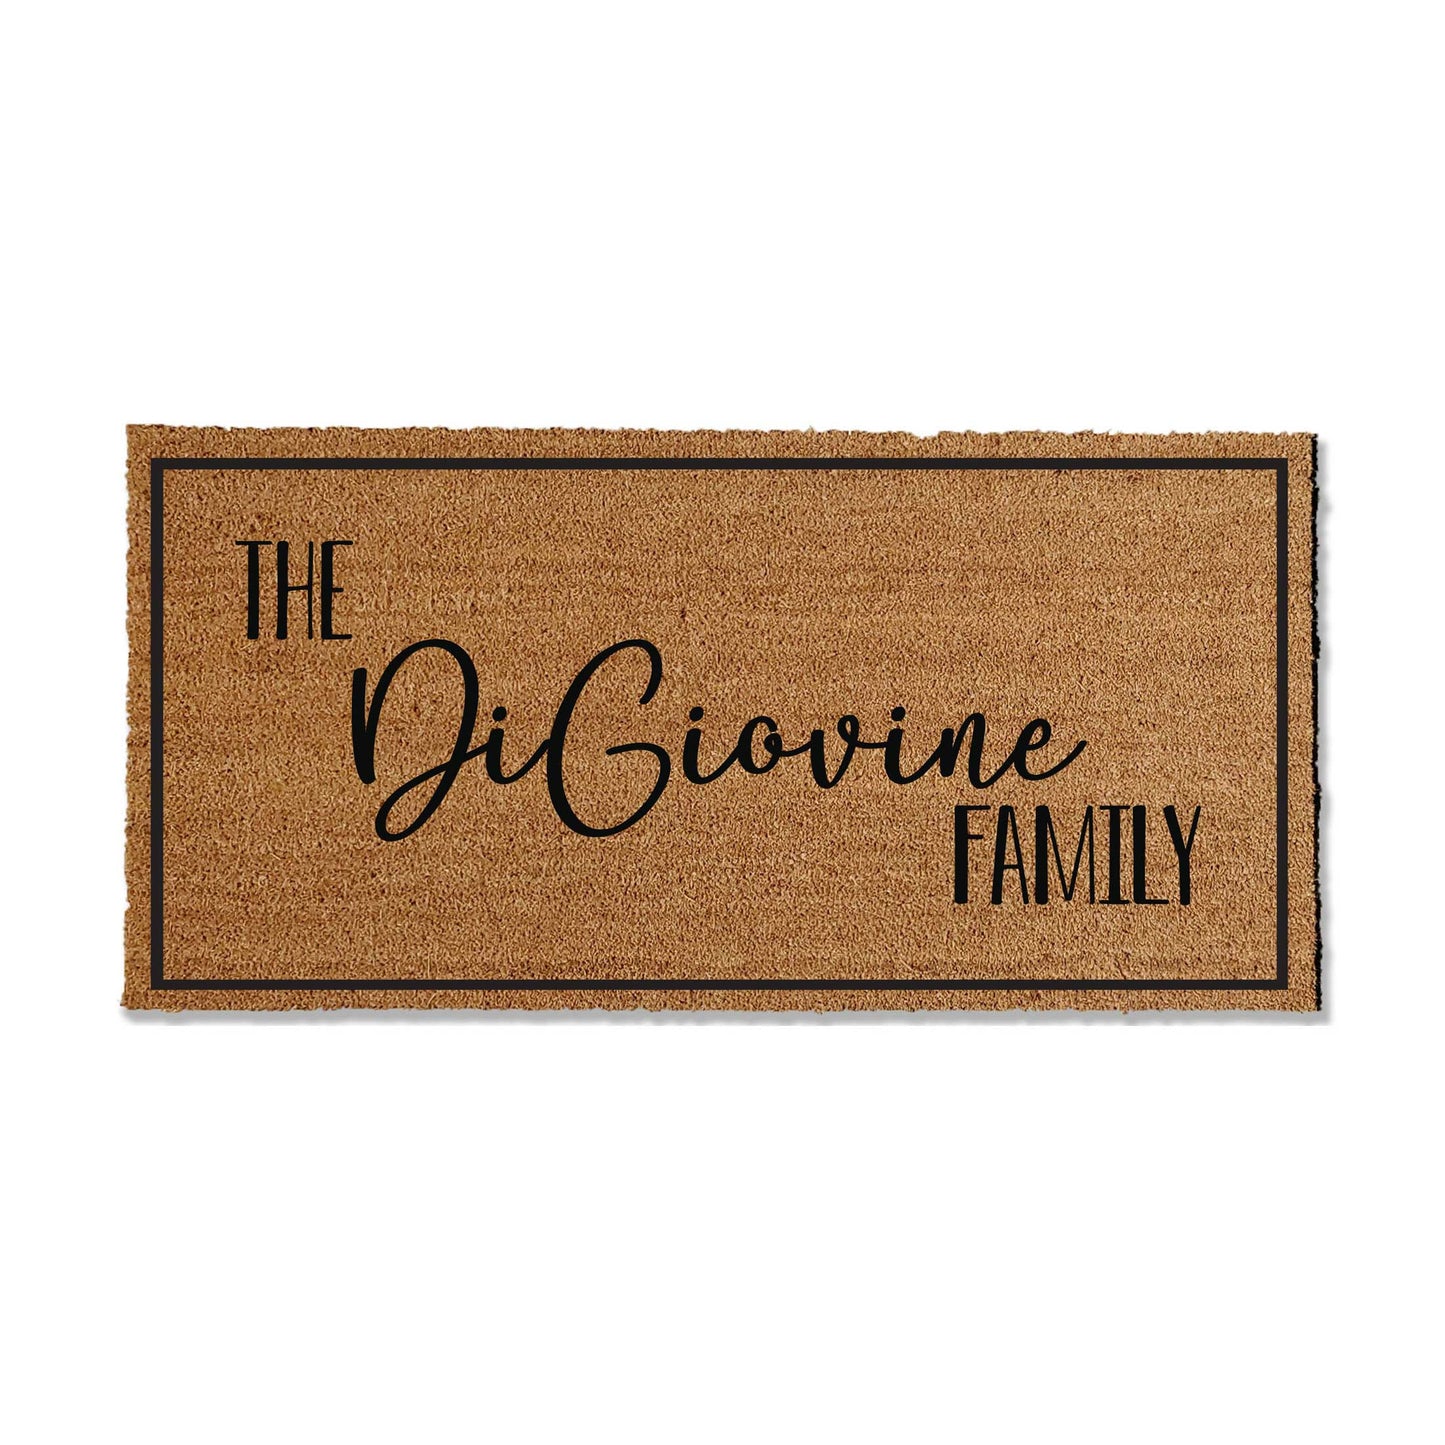 Custom coir doormat measuring 36 inches by 72 inches, featuring a personalized design or message. Made from natural coir fibers for durability and a classic look. Perfect for adding a welcoming touch to your entryway.